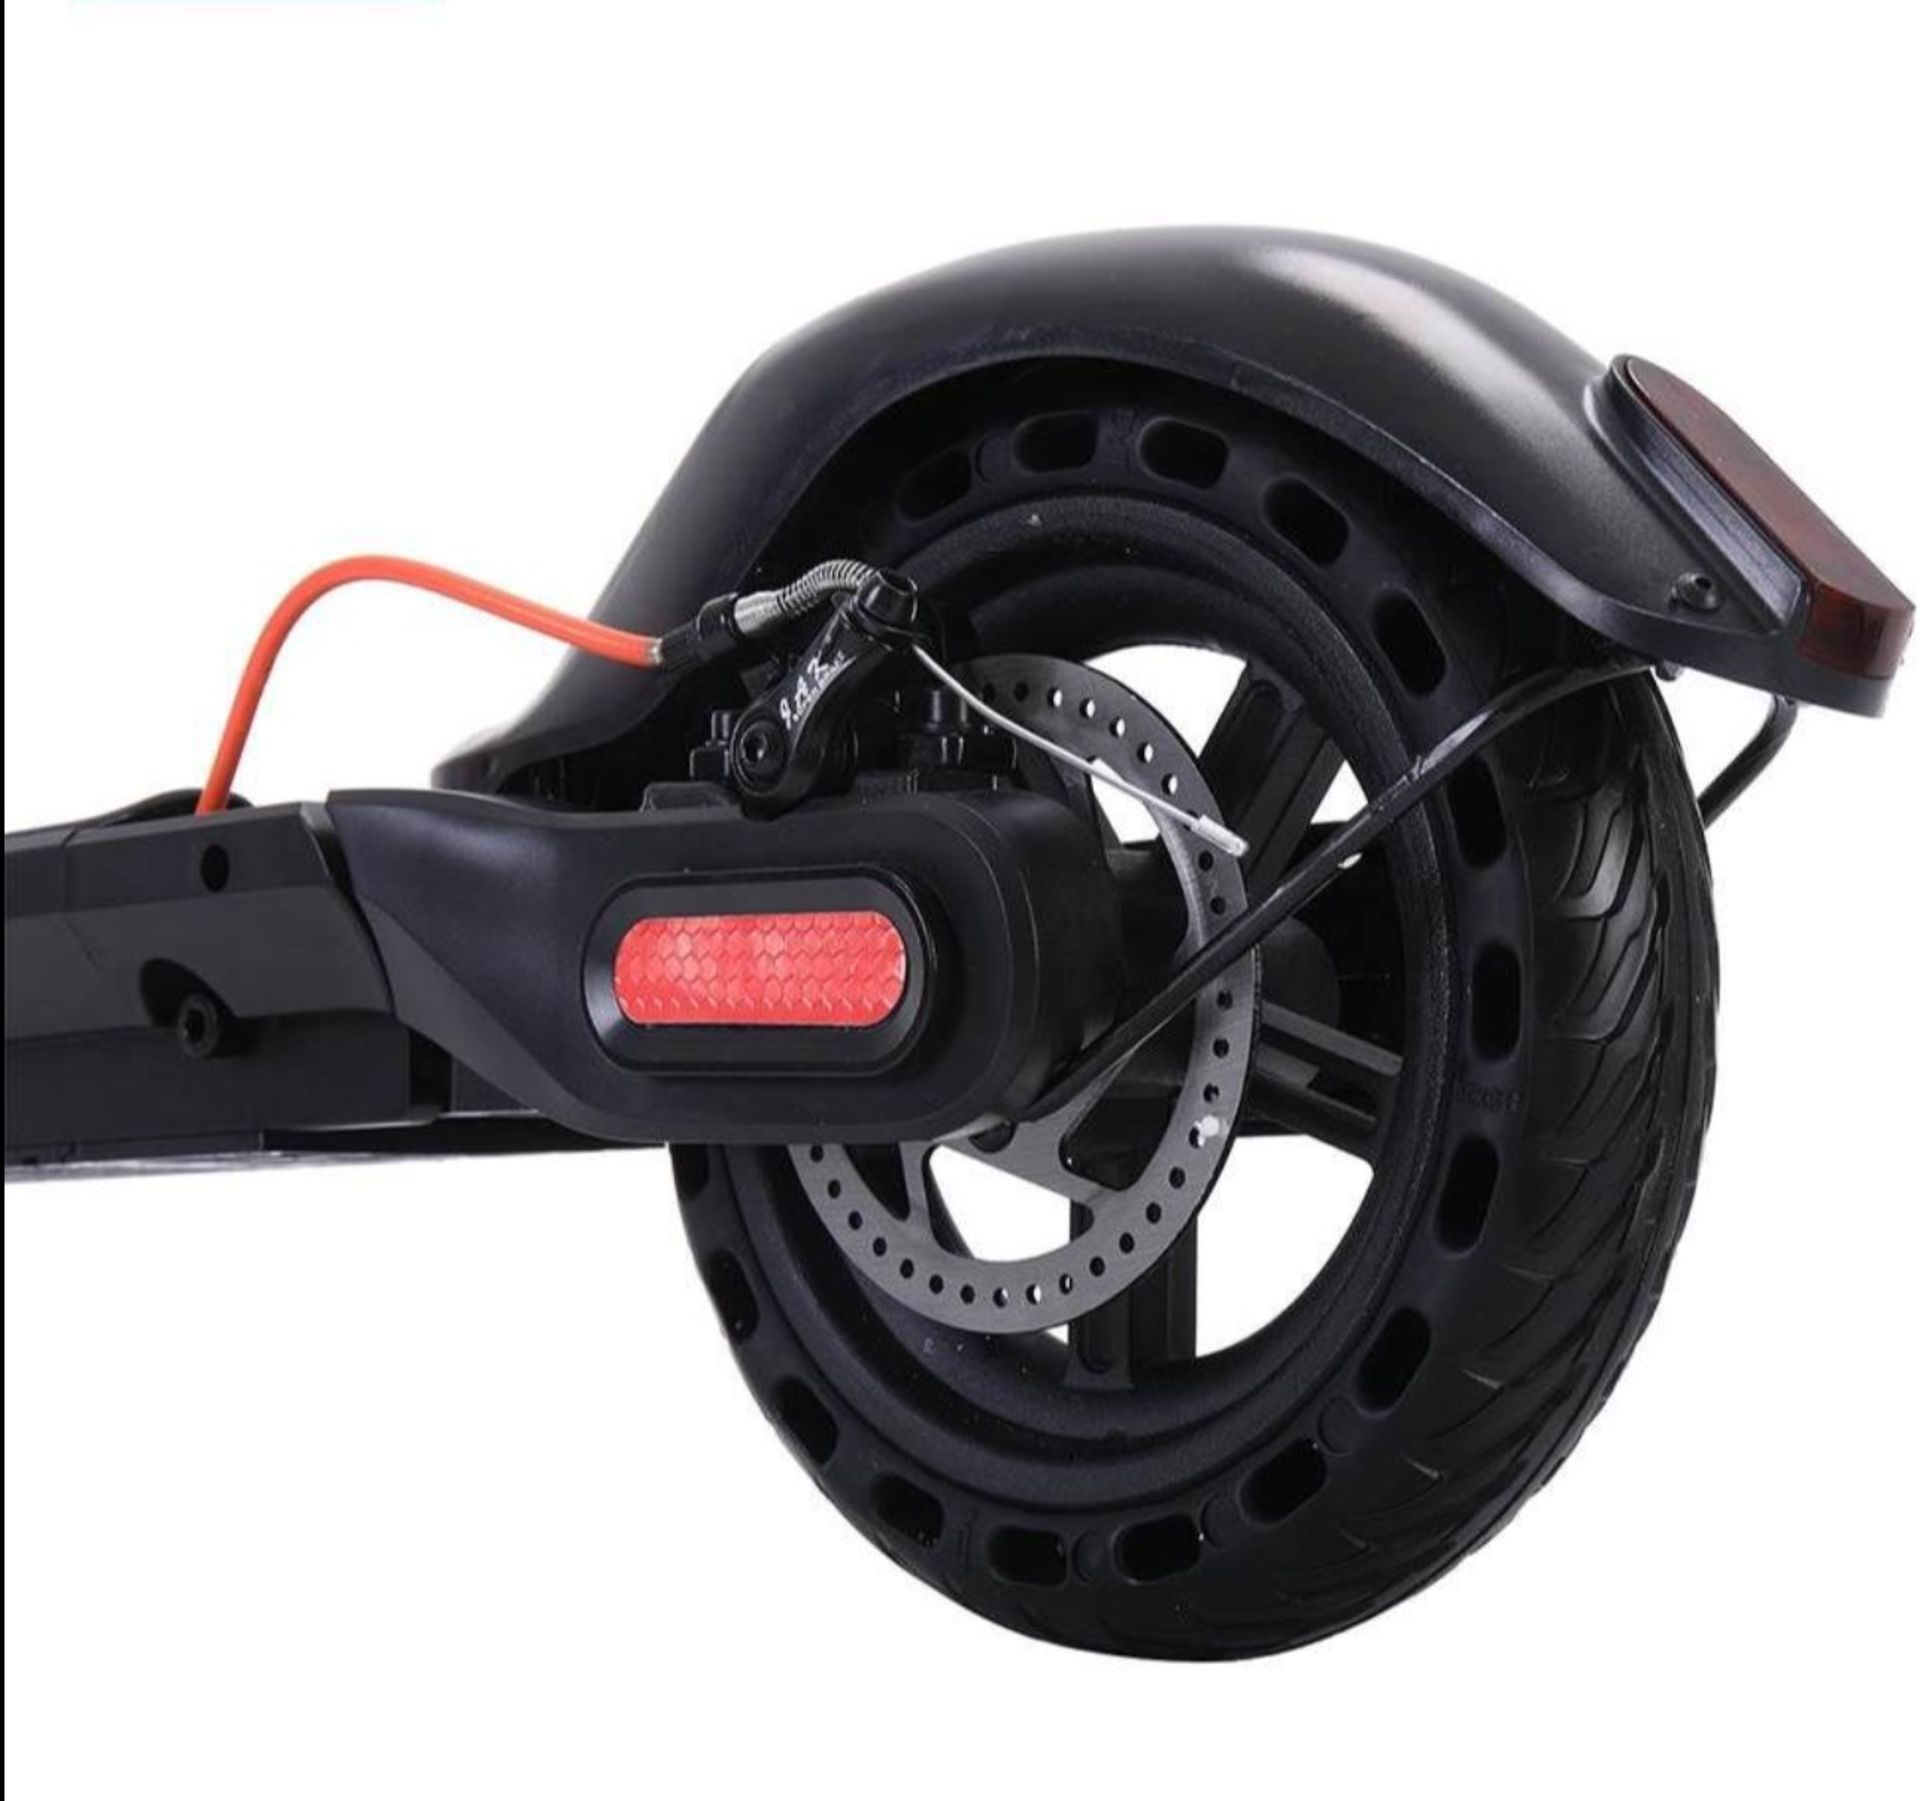 Brand New Gravity M5-1 Pro Electric Scooter 8.5 Inch Foldable Adult E-Scooter RRP £349 - Image 3 of 4